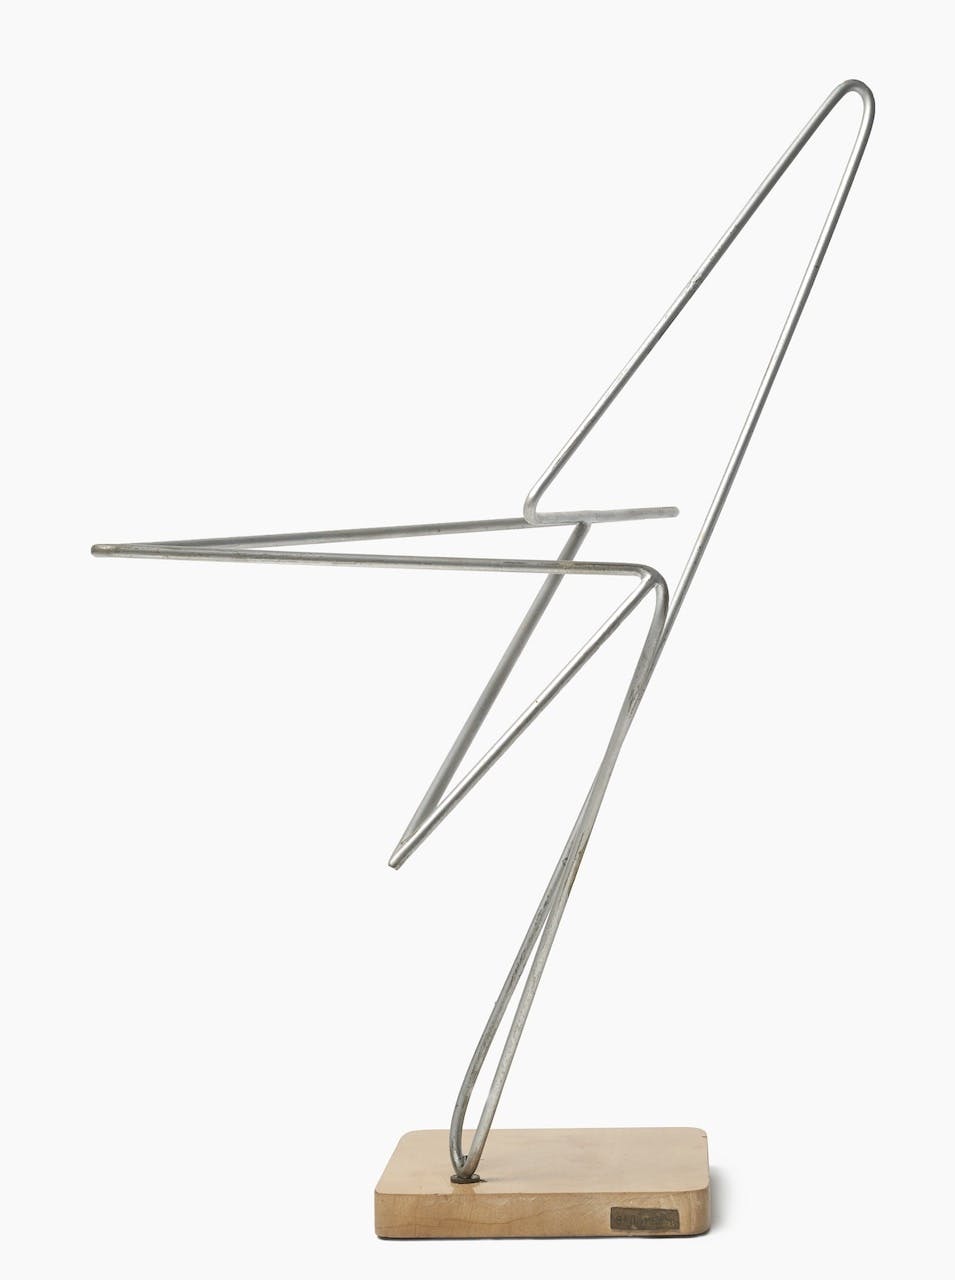 Image of abstract, free-standing sculpture by Claudio Girola.